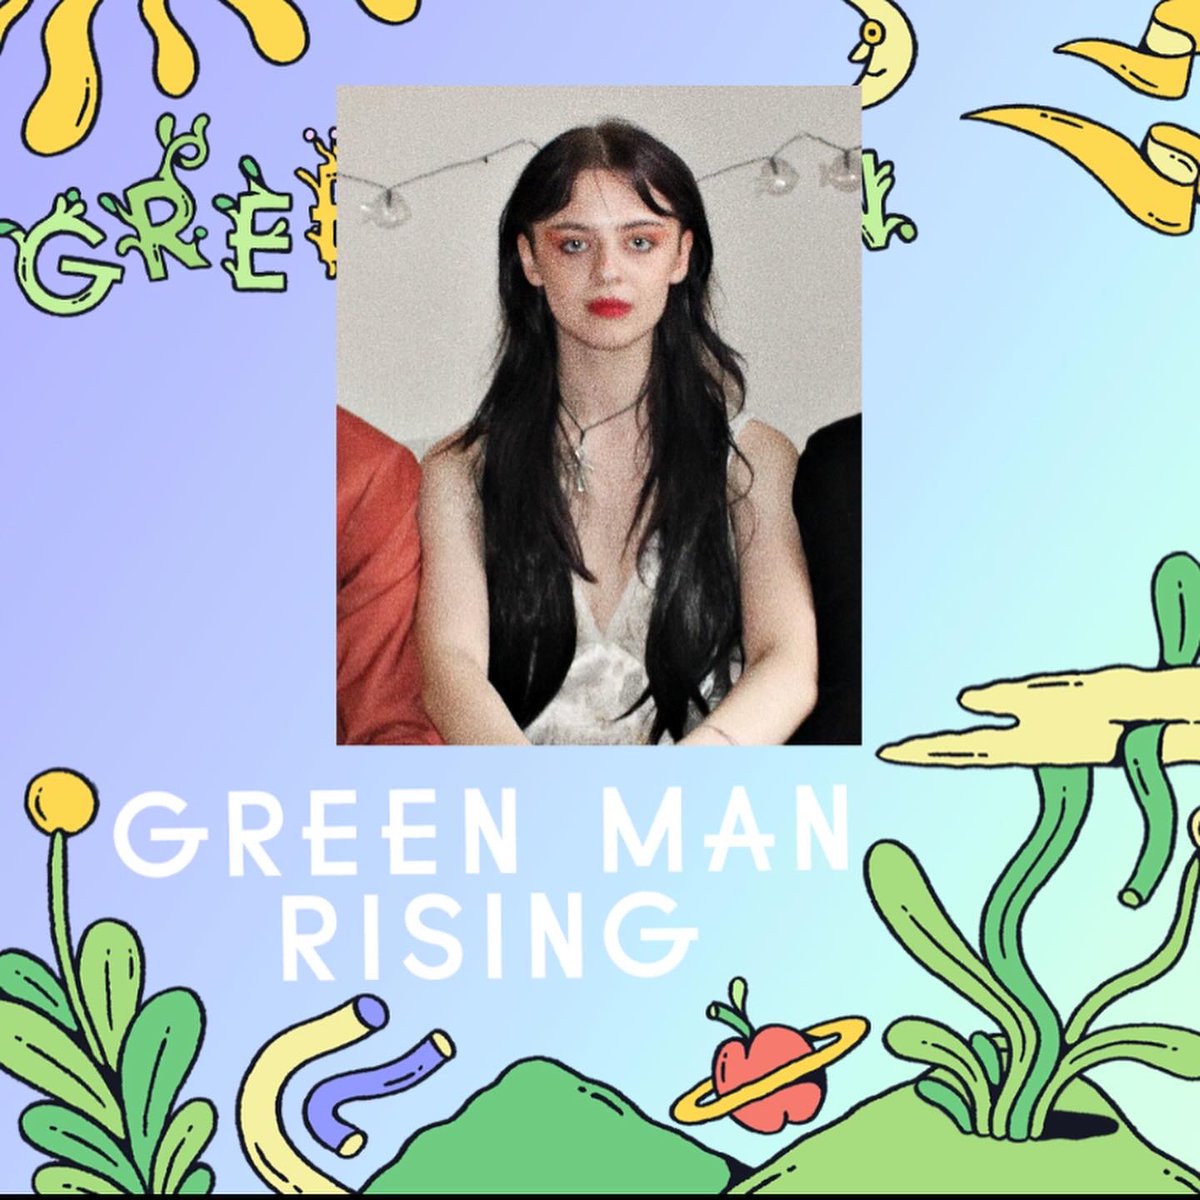 Happy to announce I’ve been selected as one of the 25 longlisted acts for Green Man Rising 🌈🌈🌈🌈 @GreenManFest